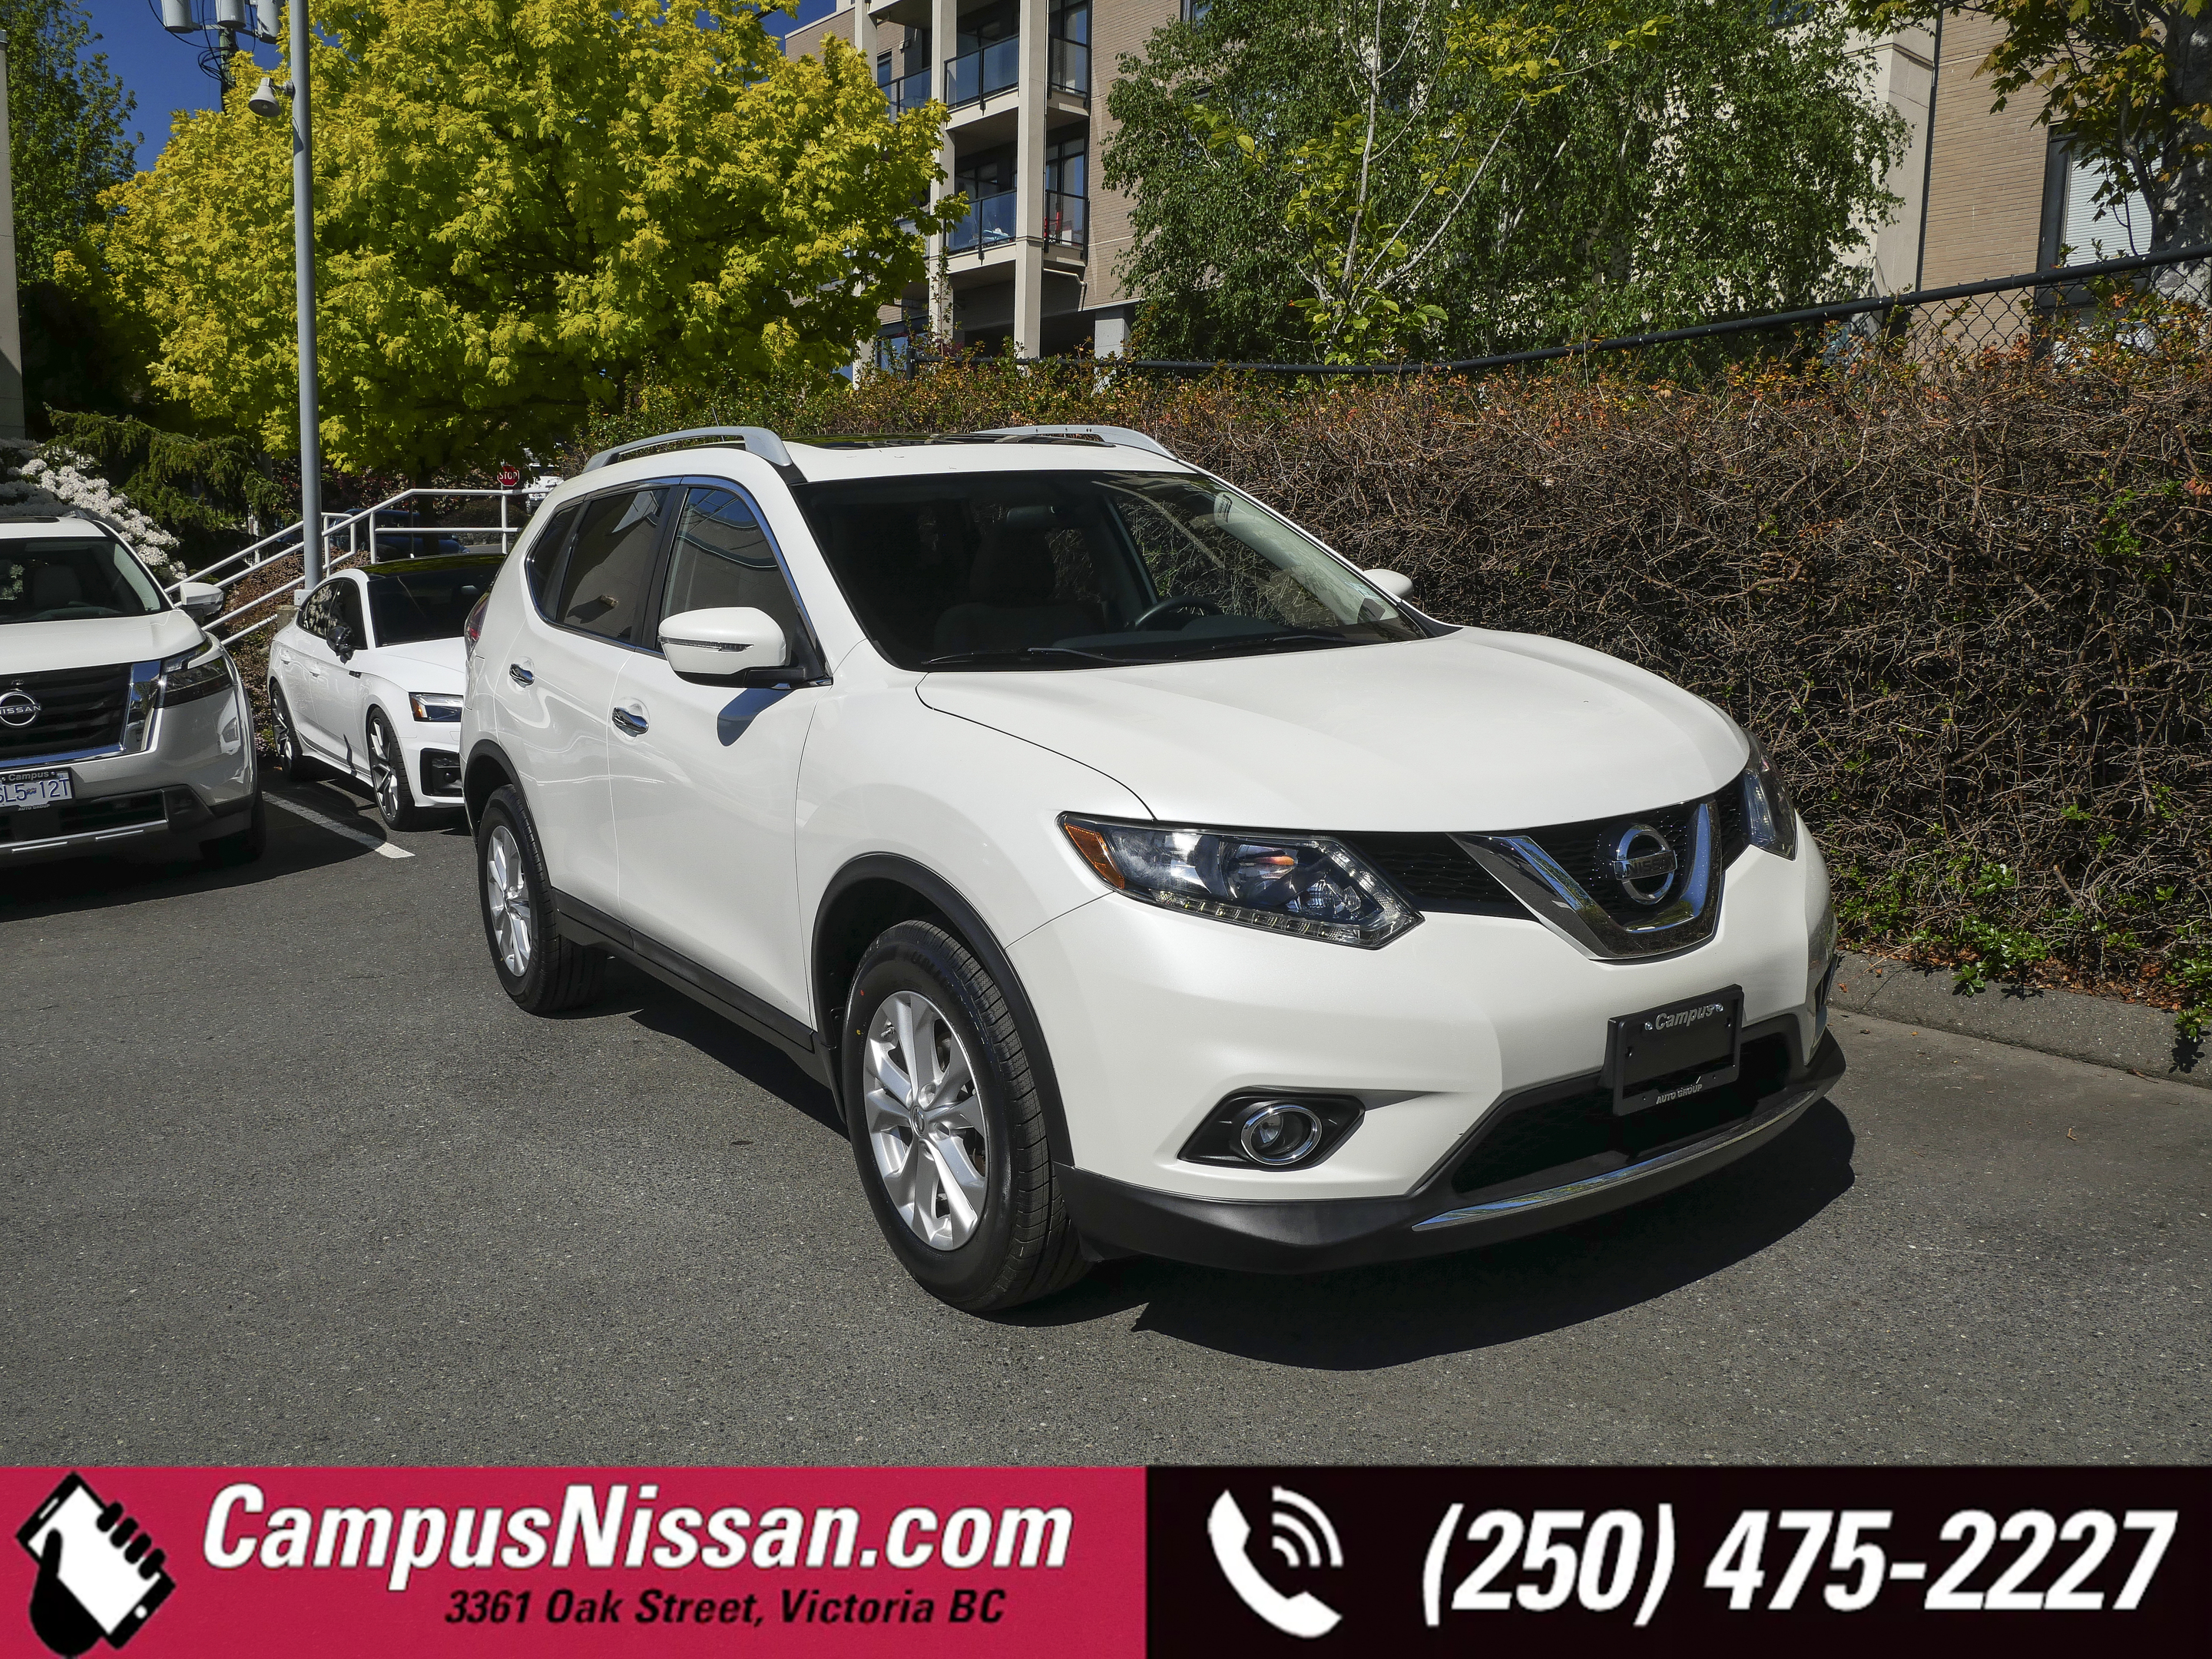 2015 Nissan Rogue S | Island Vehicle | Low KMs | 